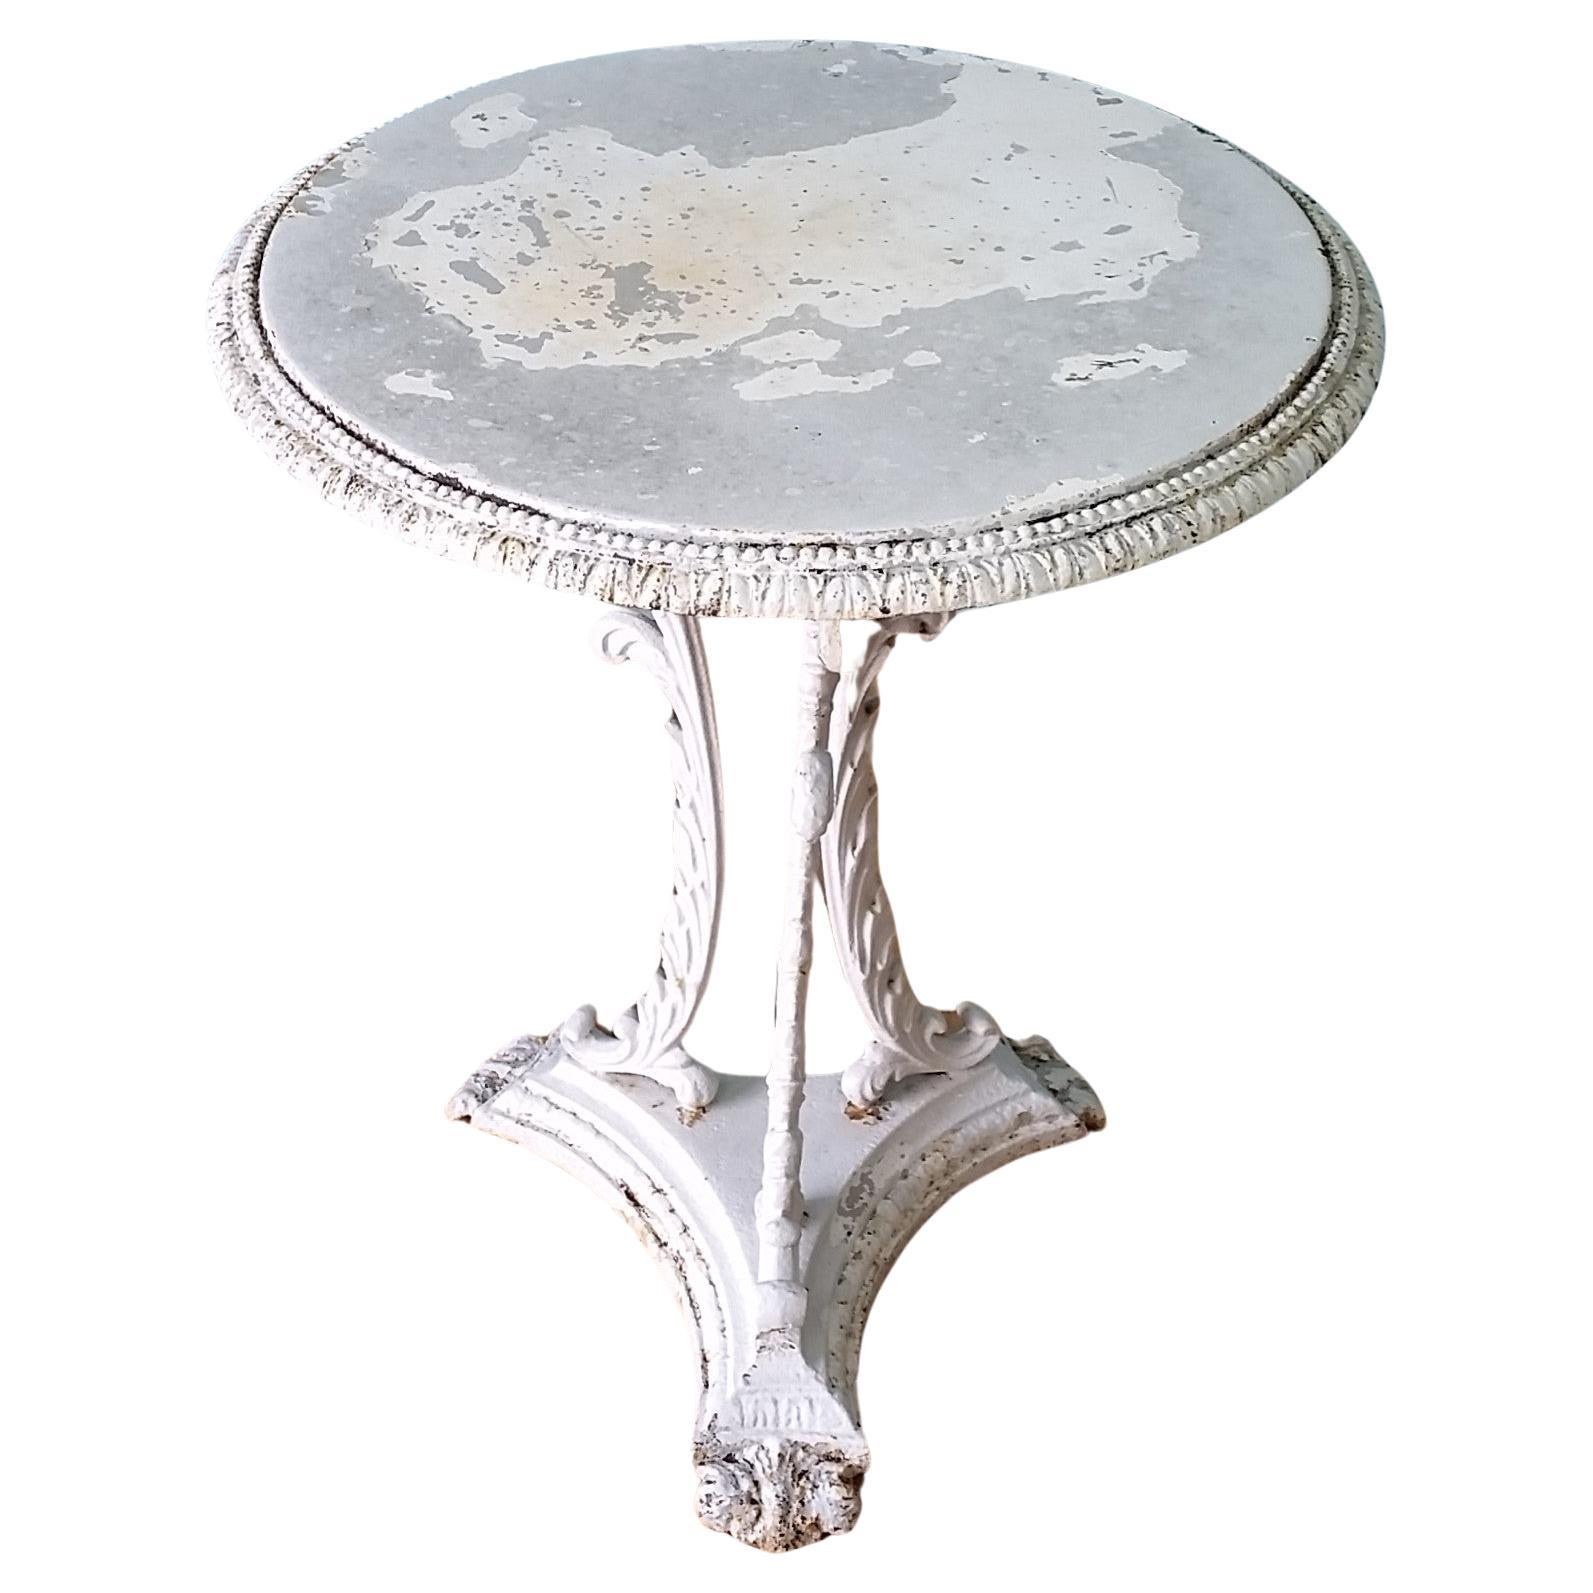 19th century English cast iron garden table For Sale